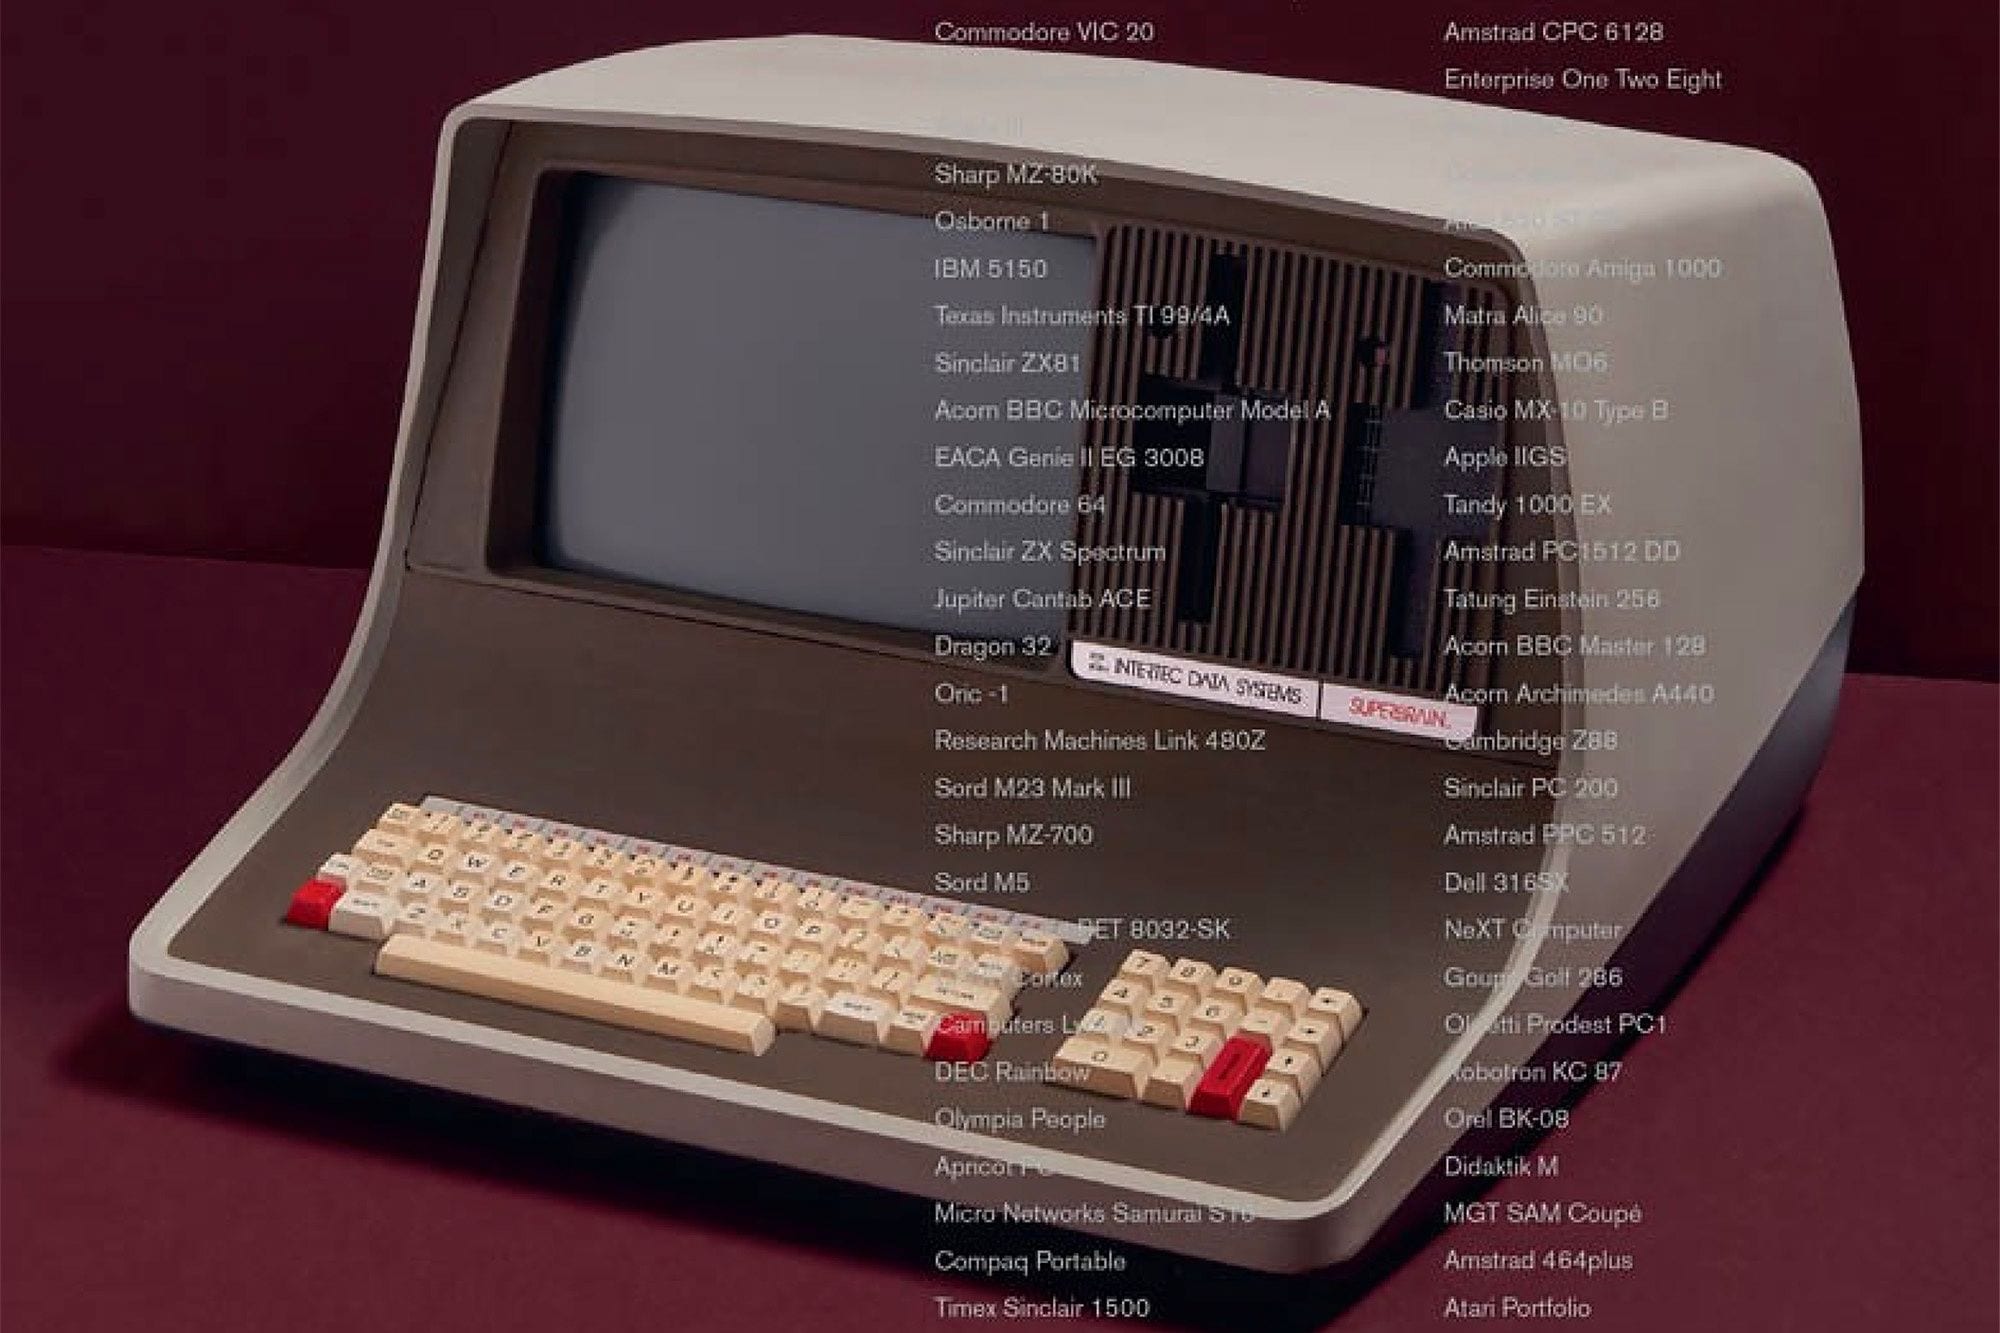 Home Computers: 100 Icons that Defined a Digital Generation (excerpt)